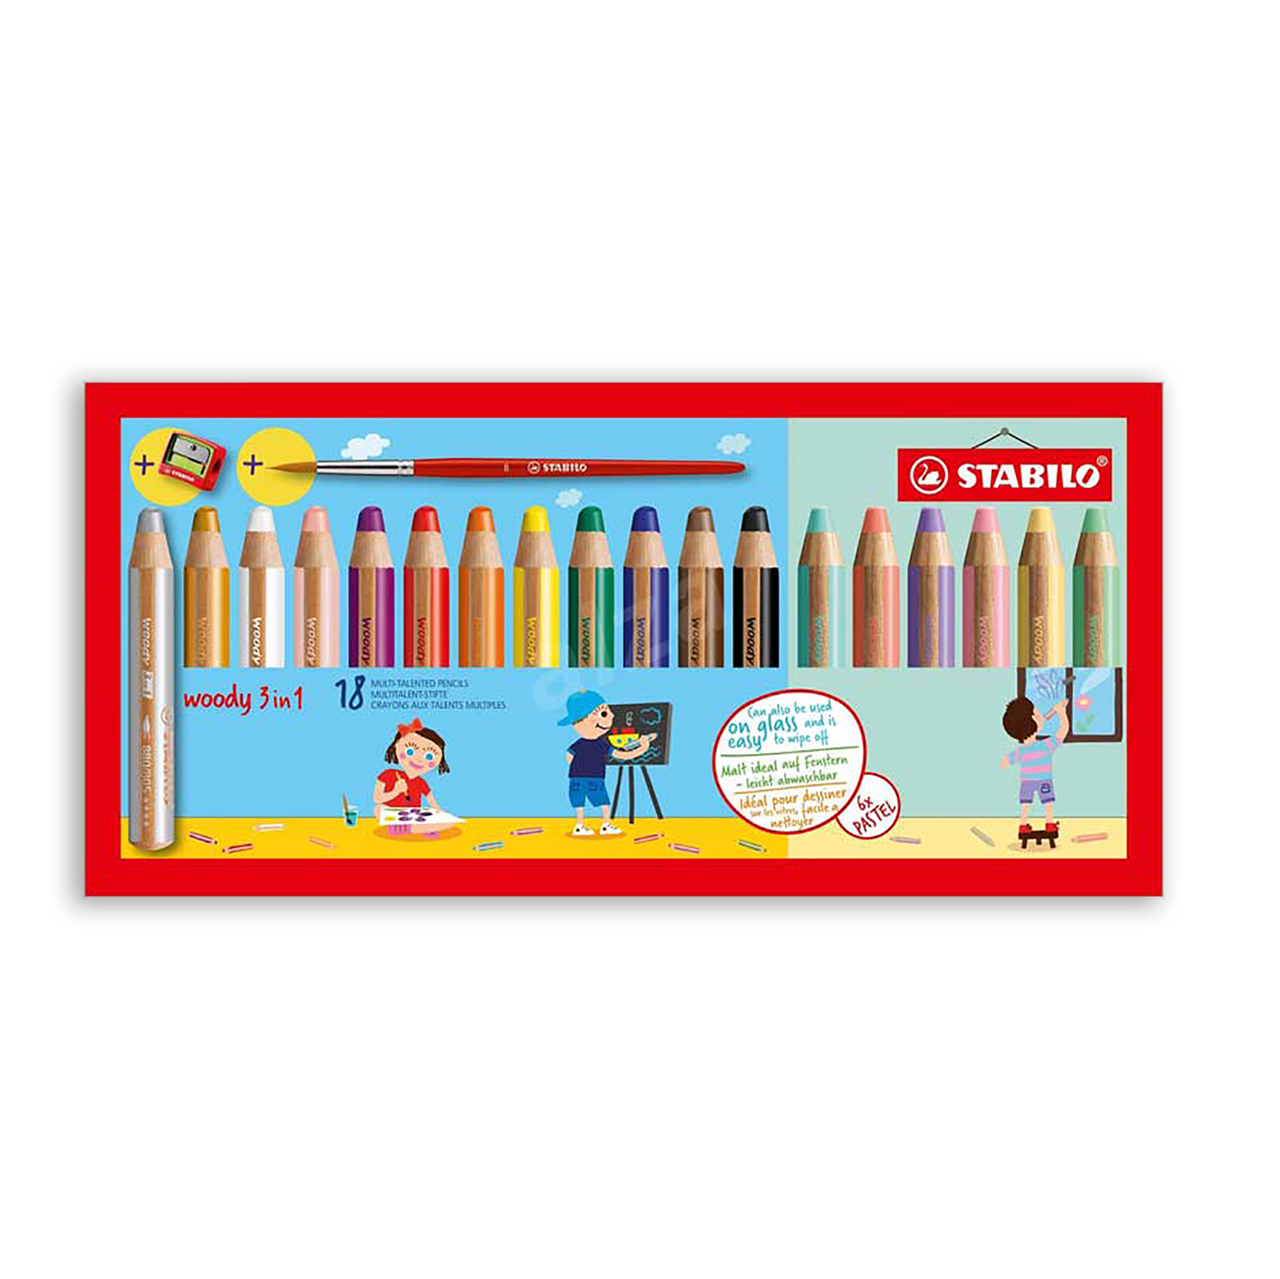 Stabilo Woody 3 in 1 Pencil - Pack of 5 / 310 Red